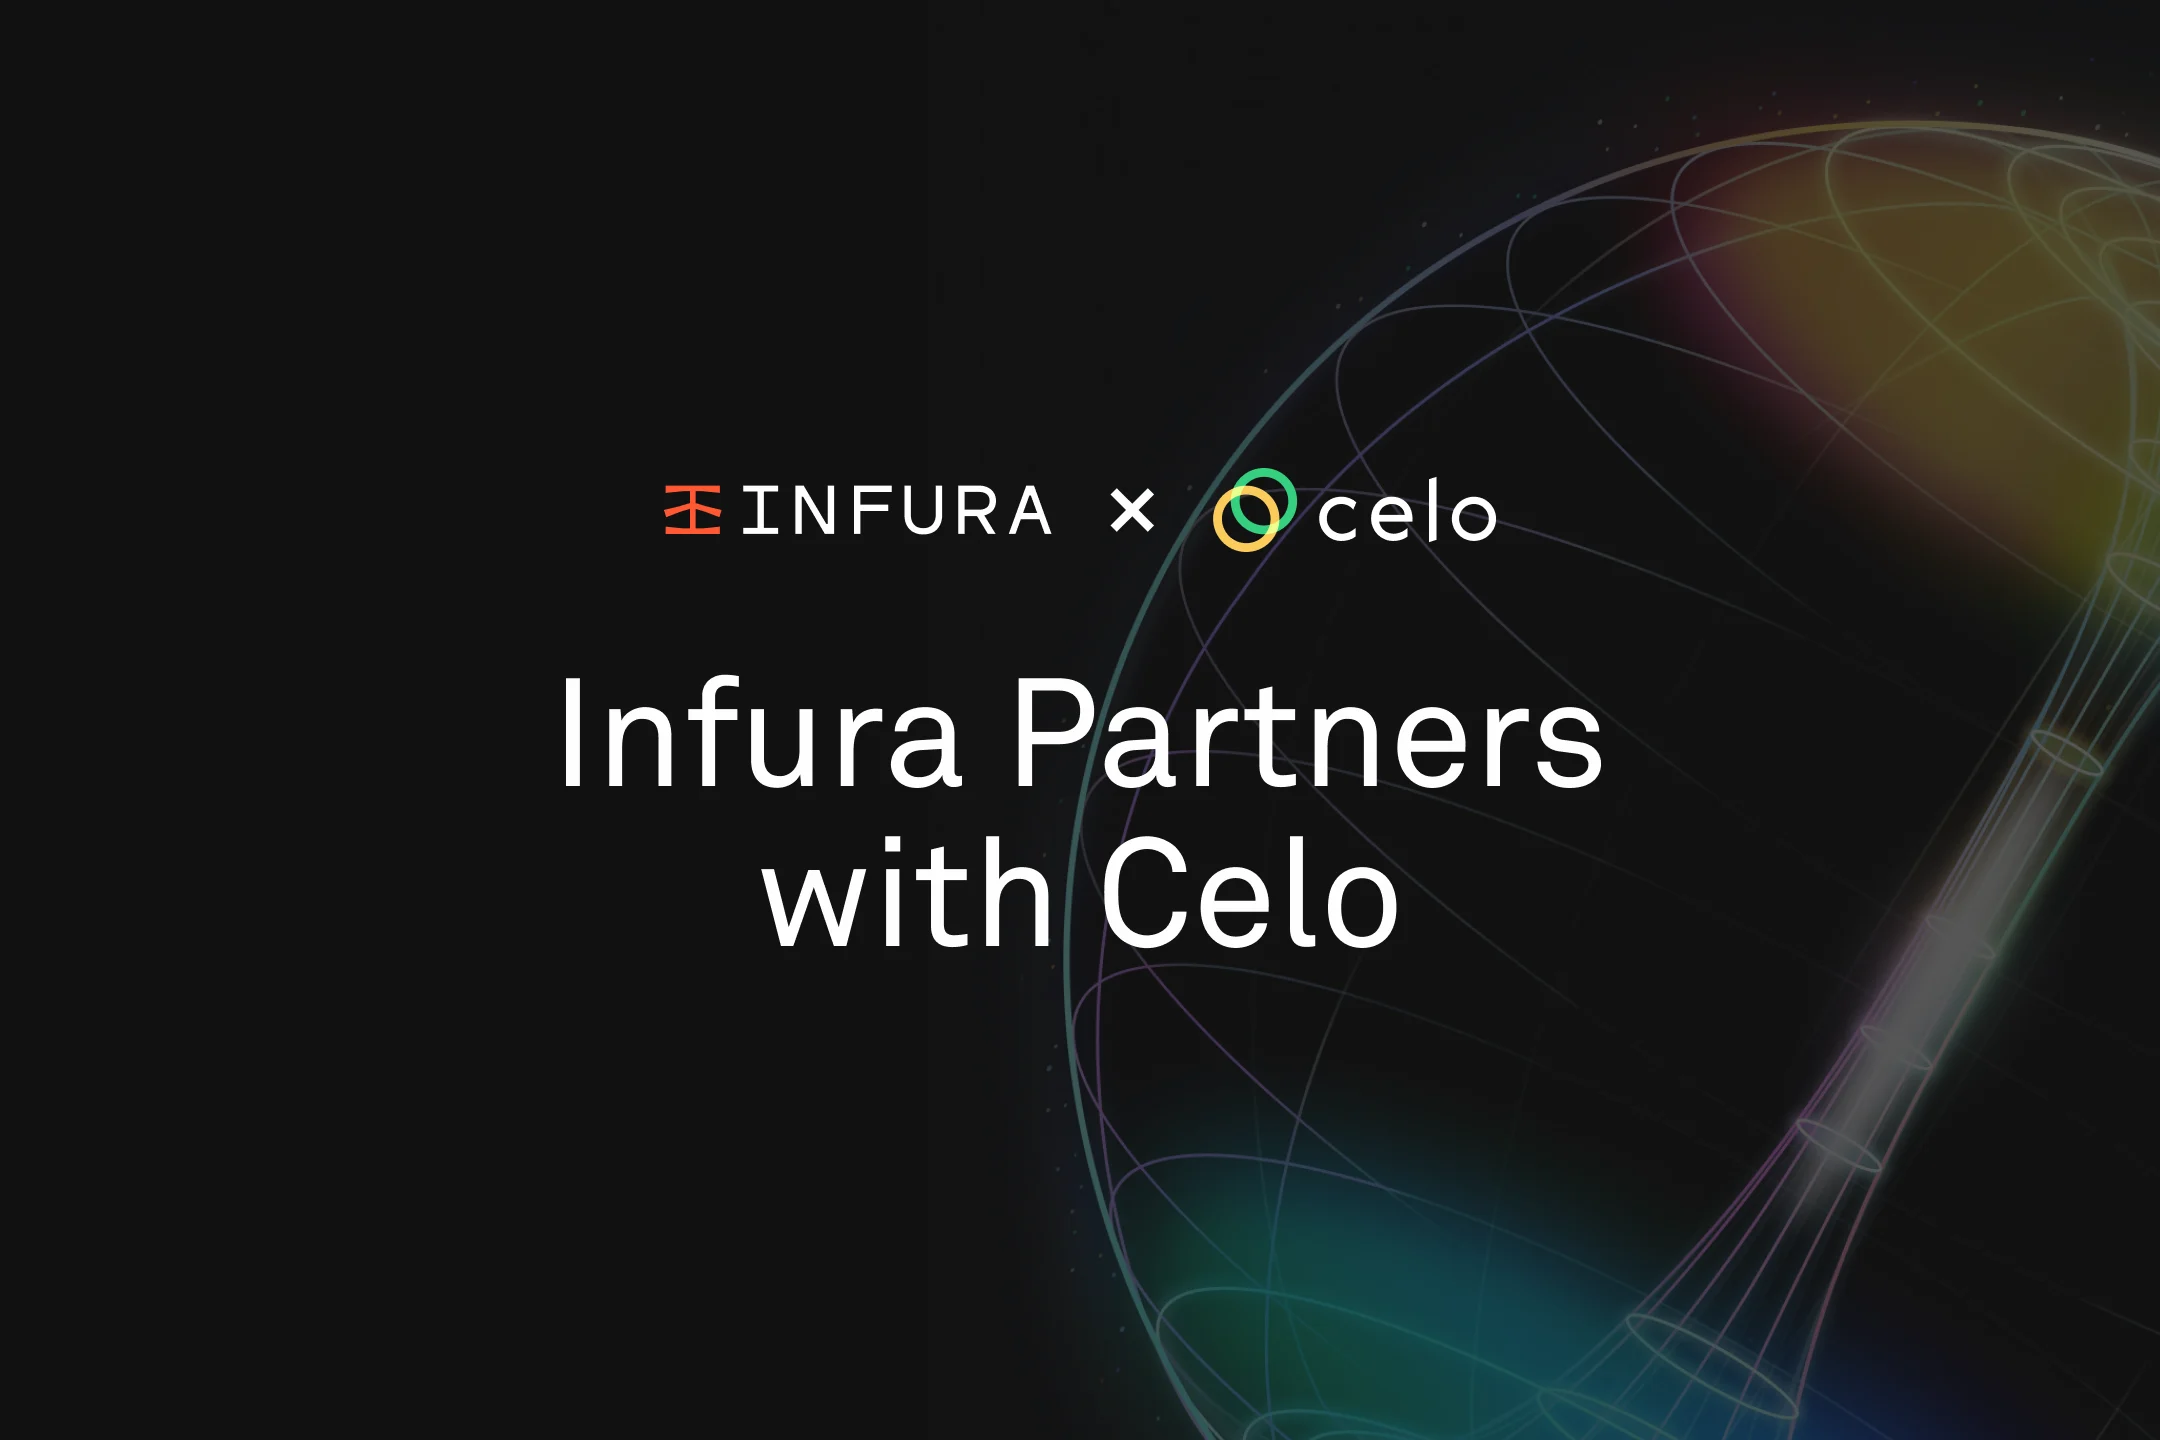 Consensys and Celo Announce a Multi-Faceted Partnership to Drive Real-World Adoption and Use Cases.